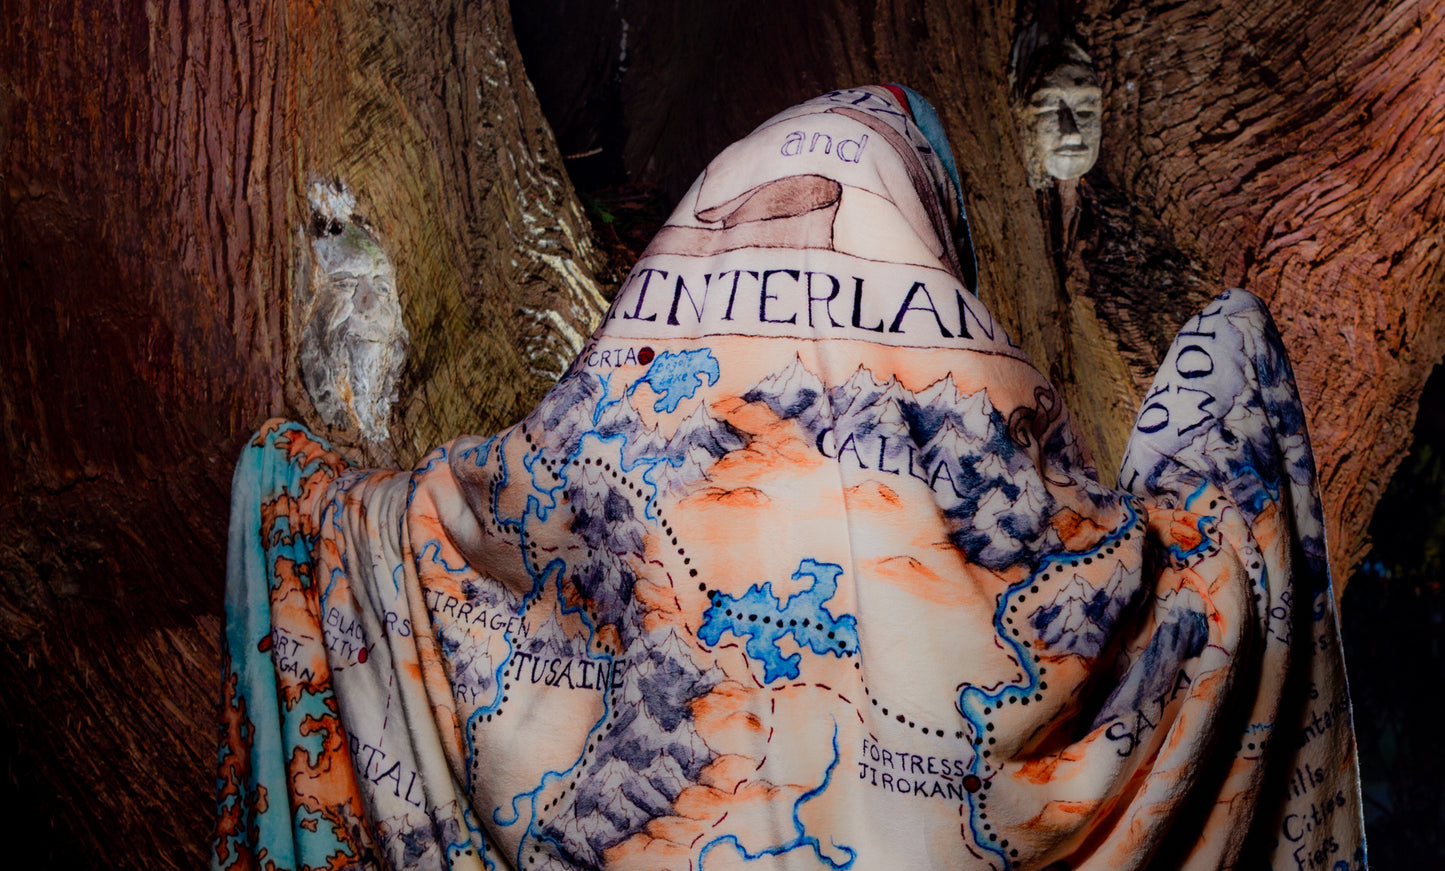 From behind, a person wears the Tortall blanket like a spooky ghost wandering in an equally spooky forest. Much of the illusstration is visible.